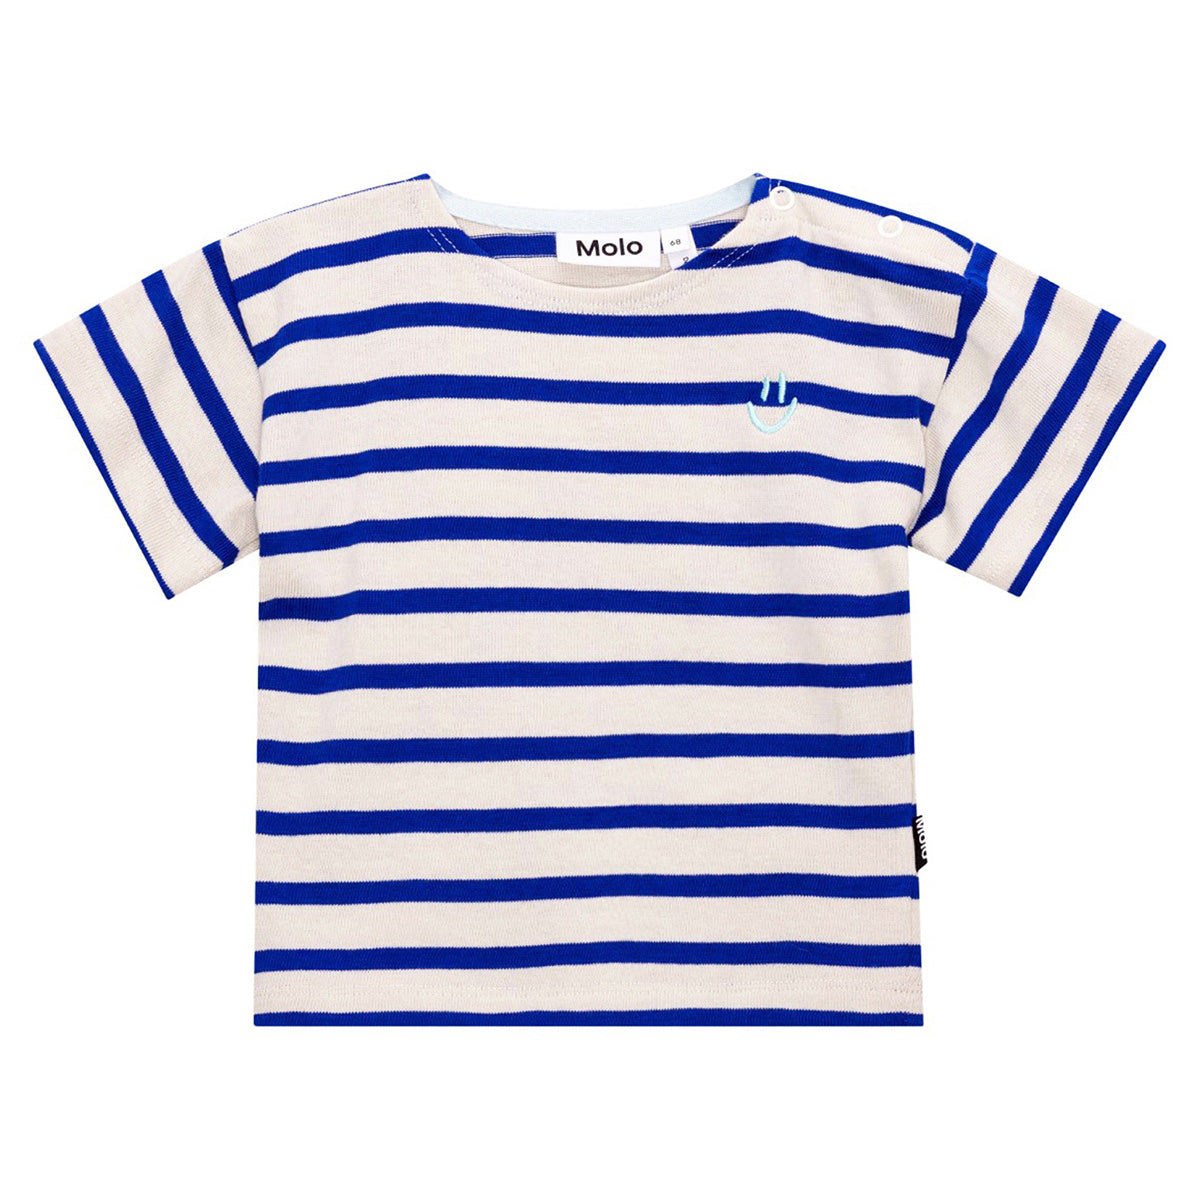 The Eivor Tee from Molo. Striped t-shirt for small children in organic cotton